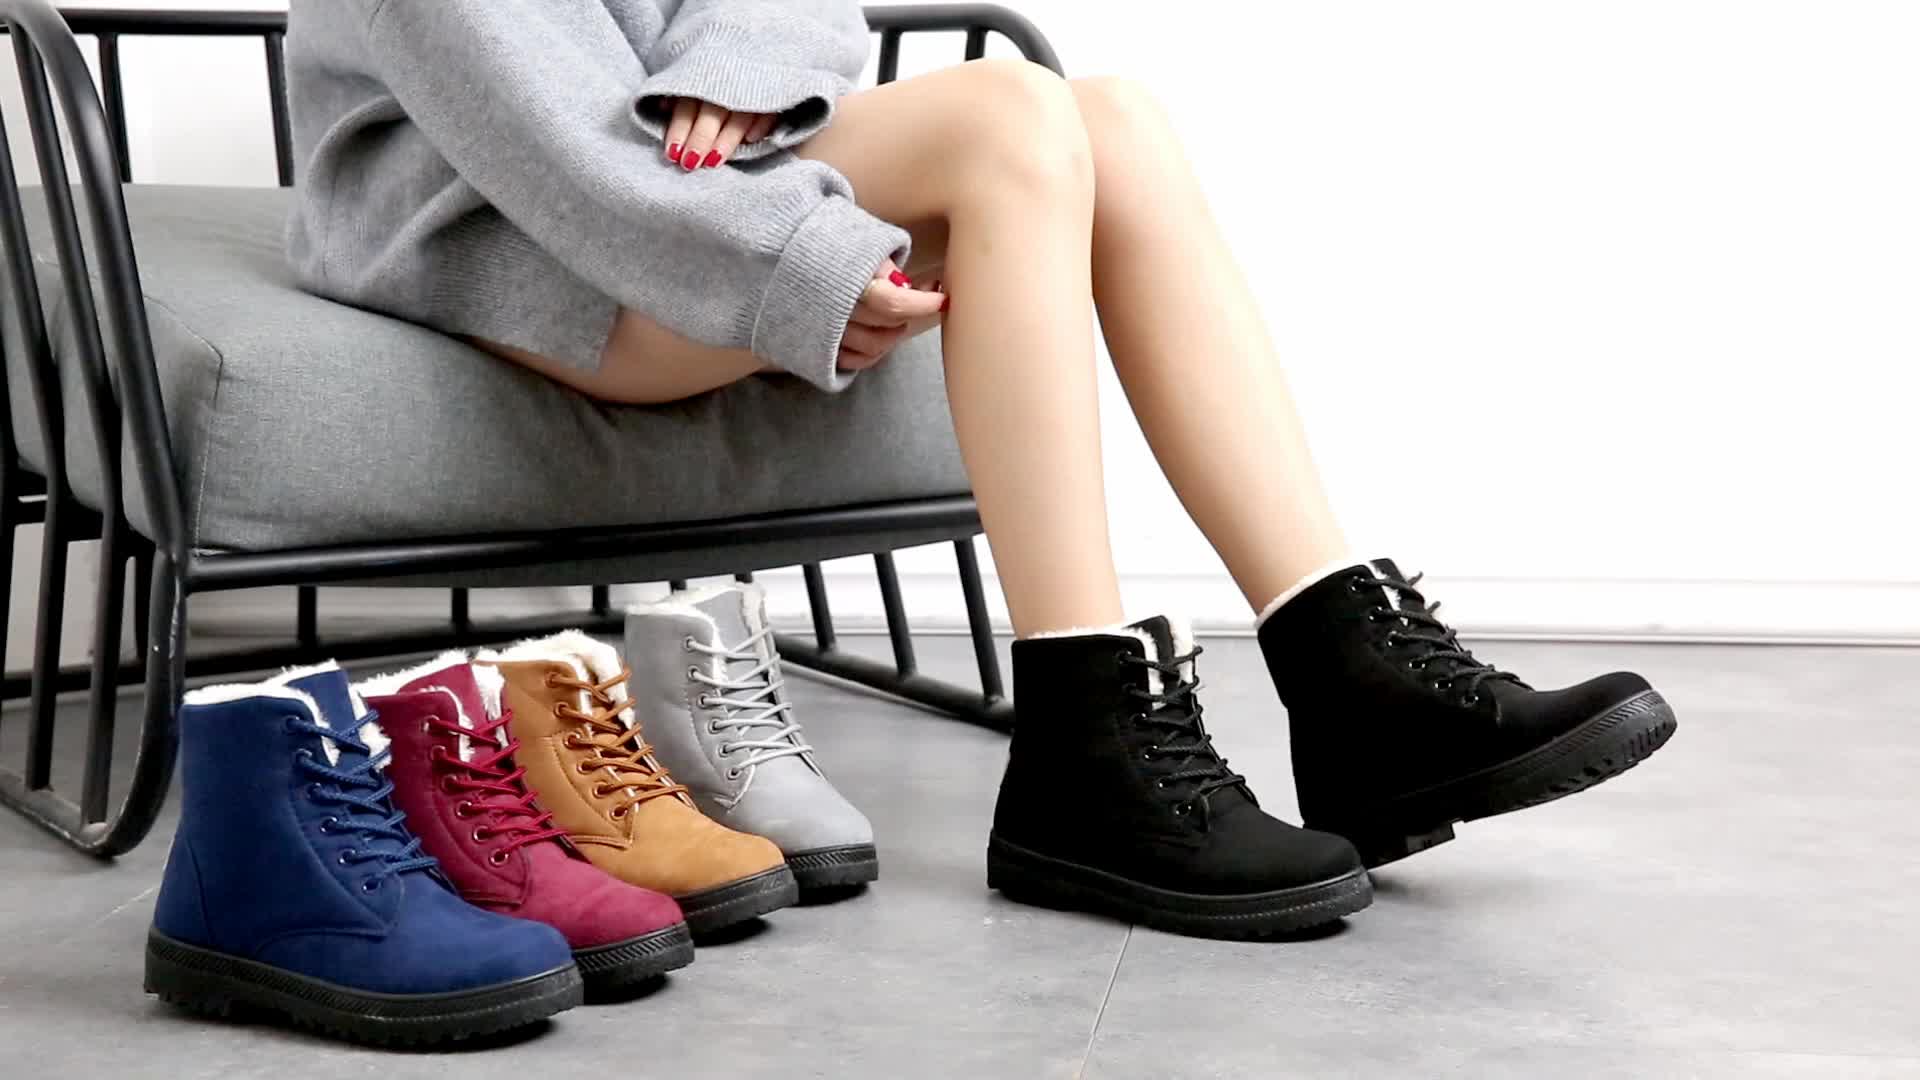 Round Toe Lace Boots Women s Warm Faux Fur Lined Ankle Boots